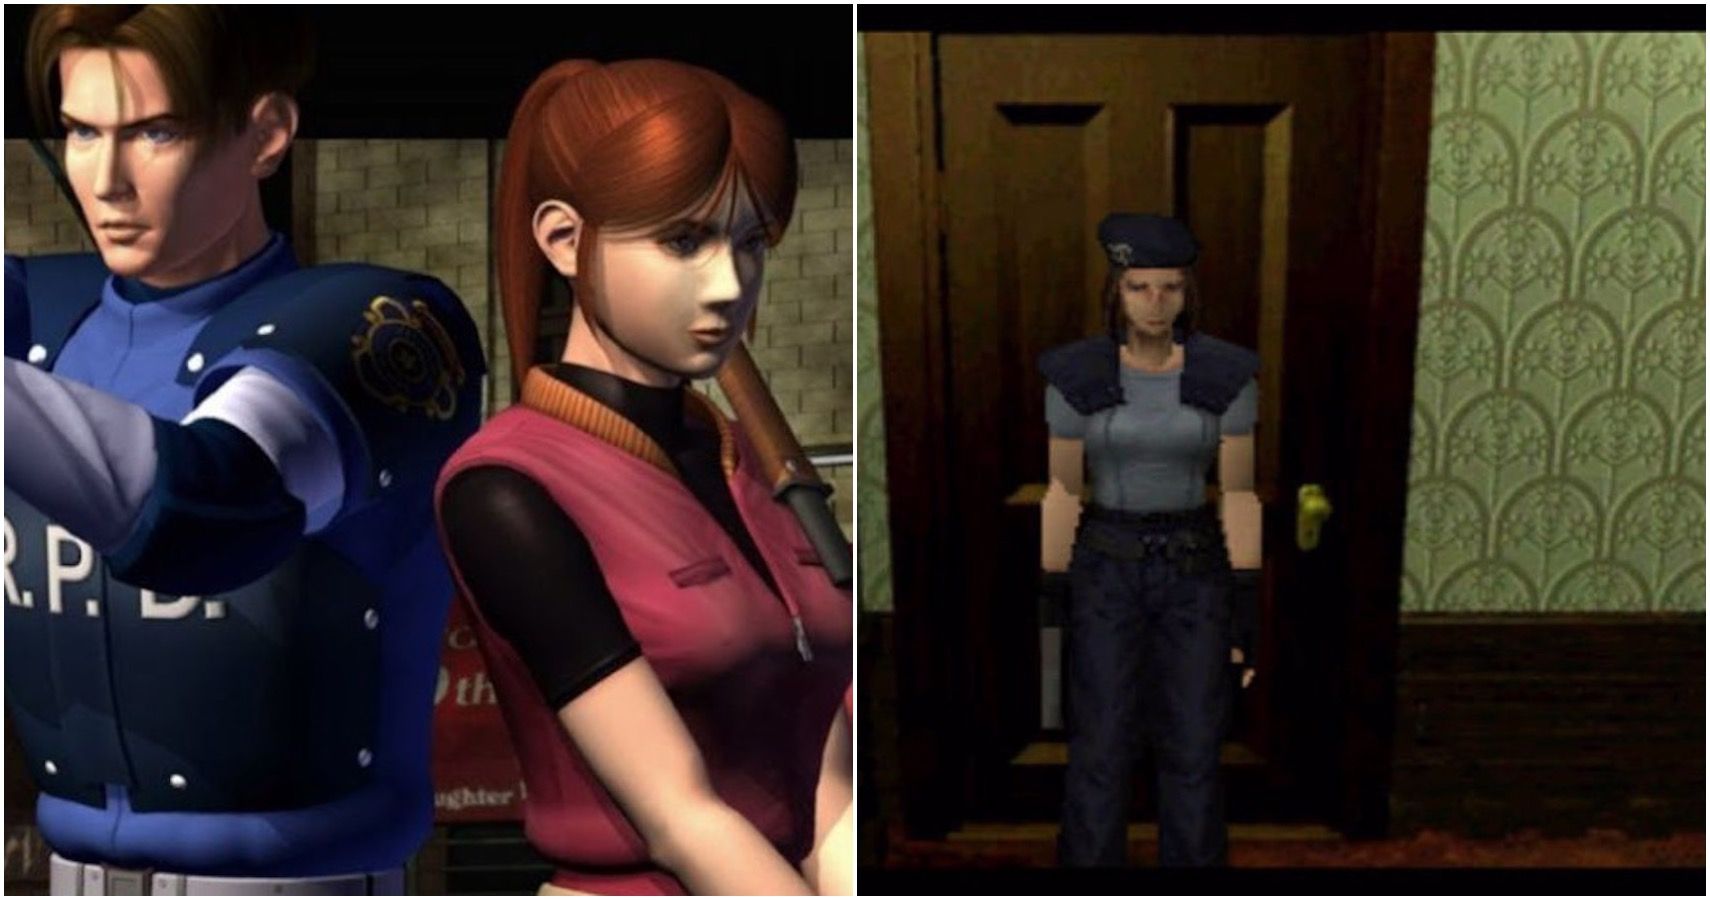 jill and leon and claire split image